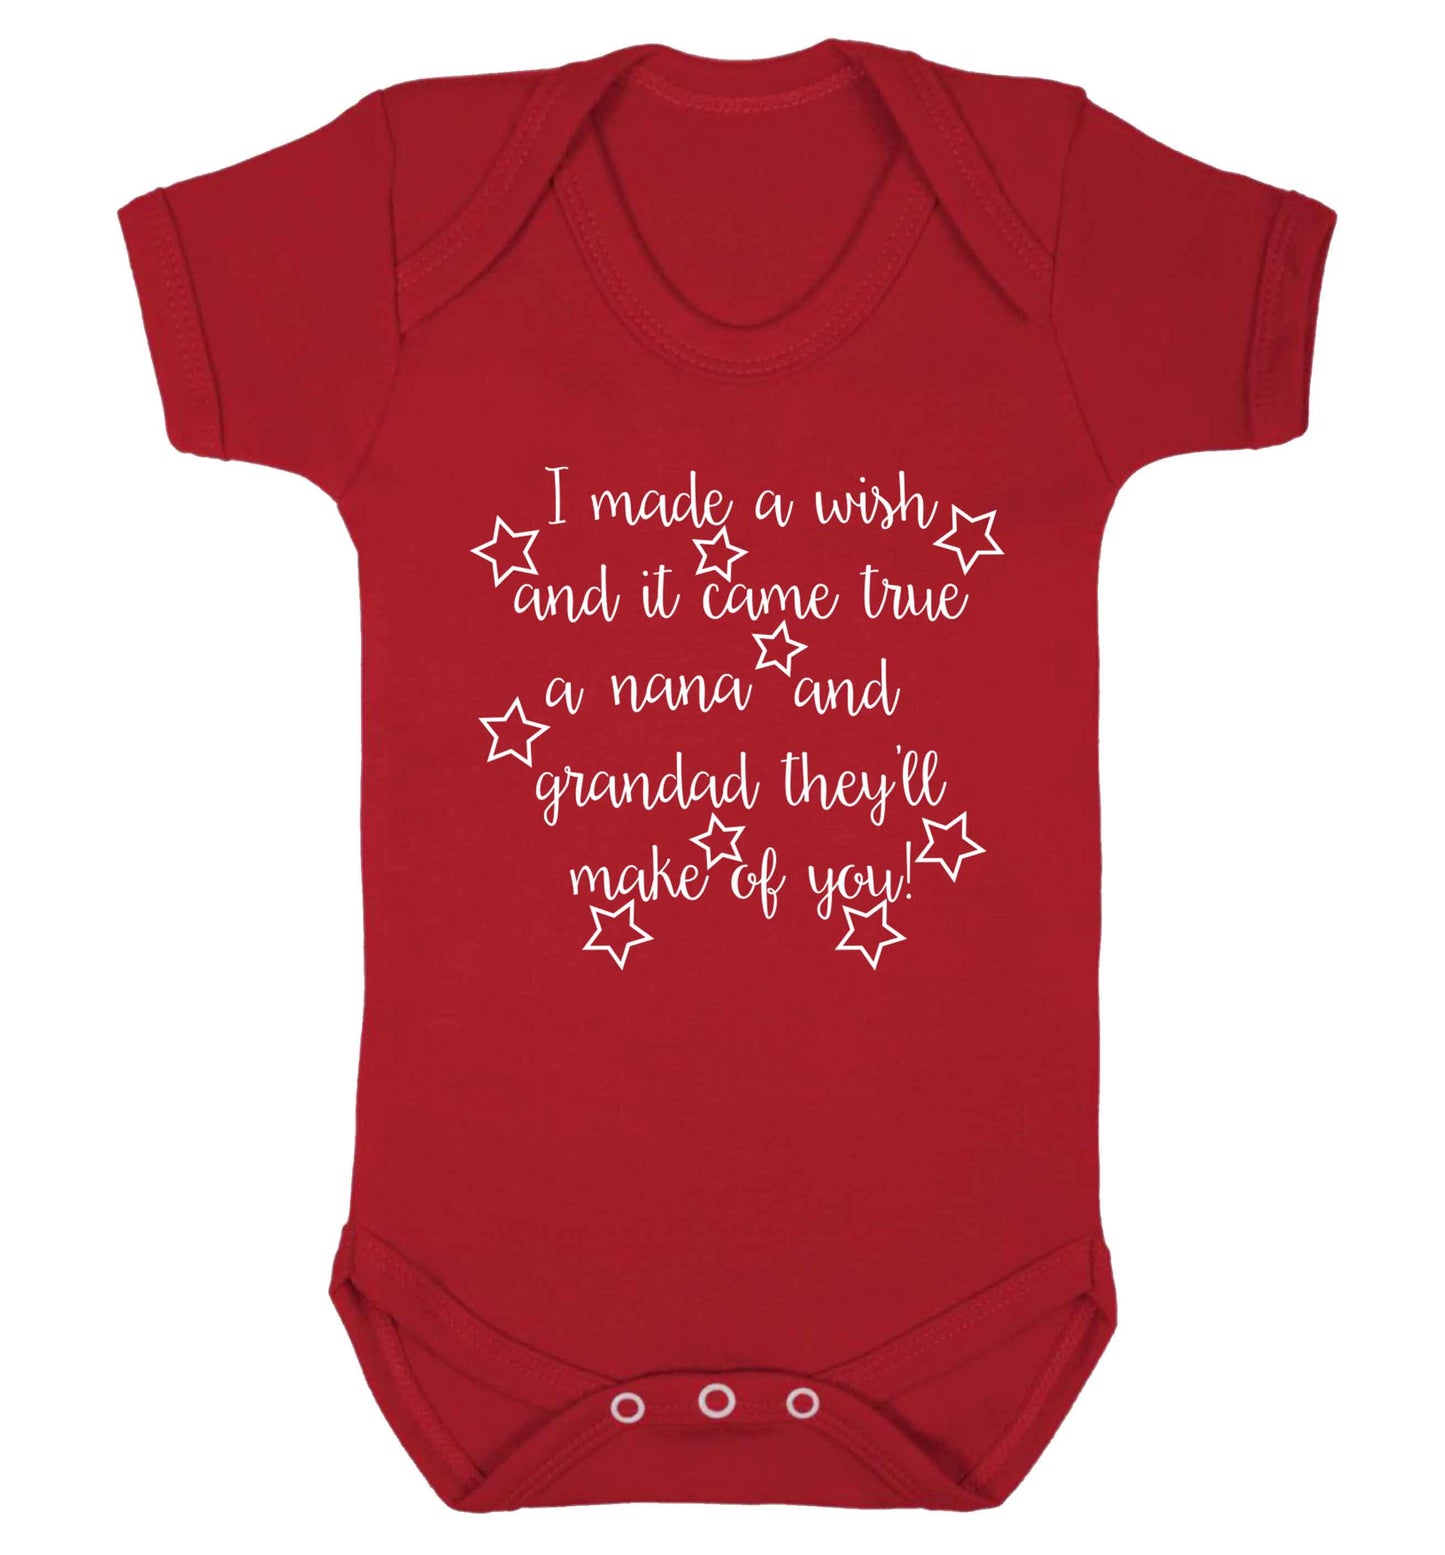 I made a wish and it came true a nana and grandad they'll make of you! Baby Vest red 18-24 months